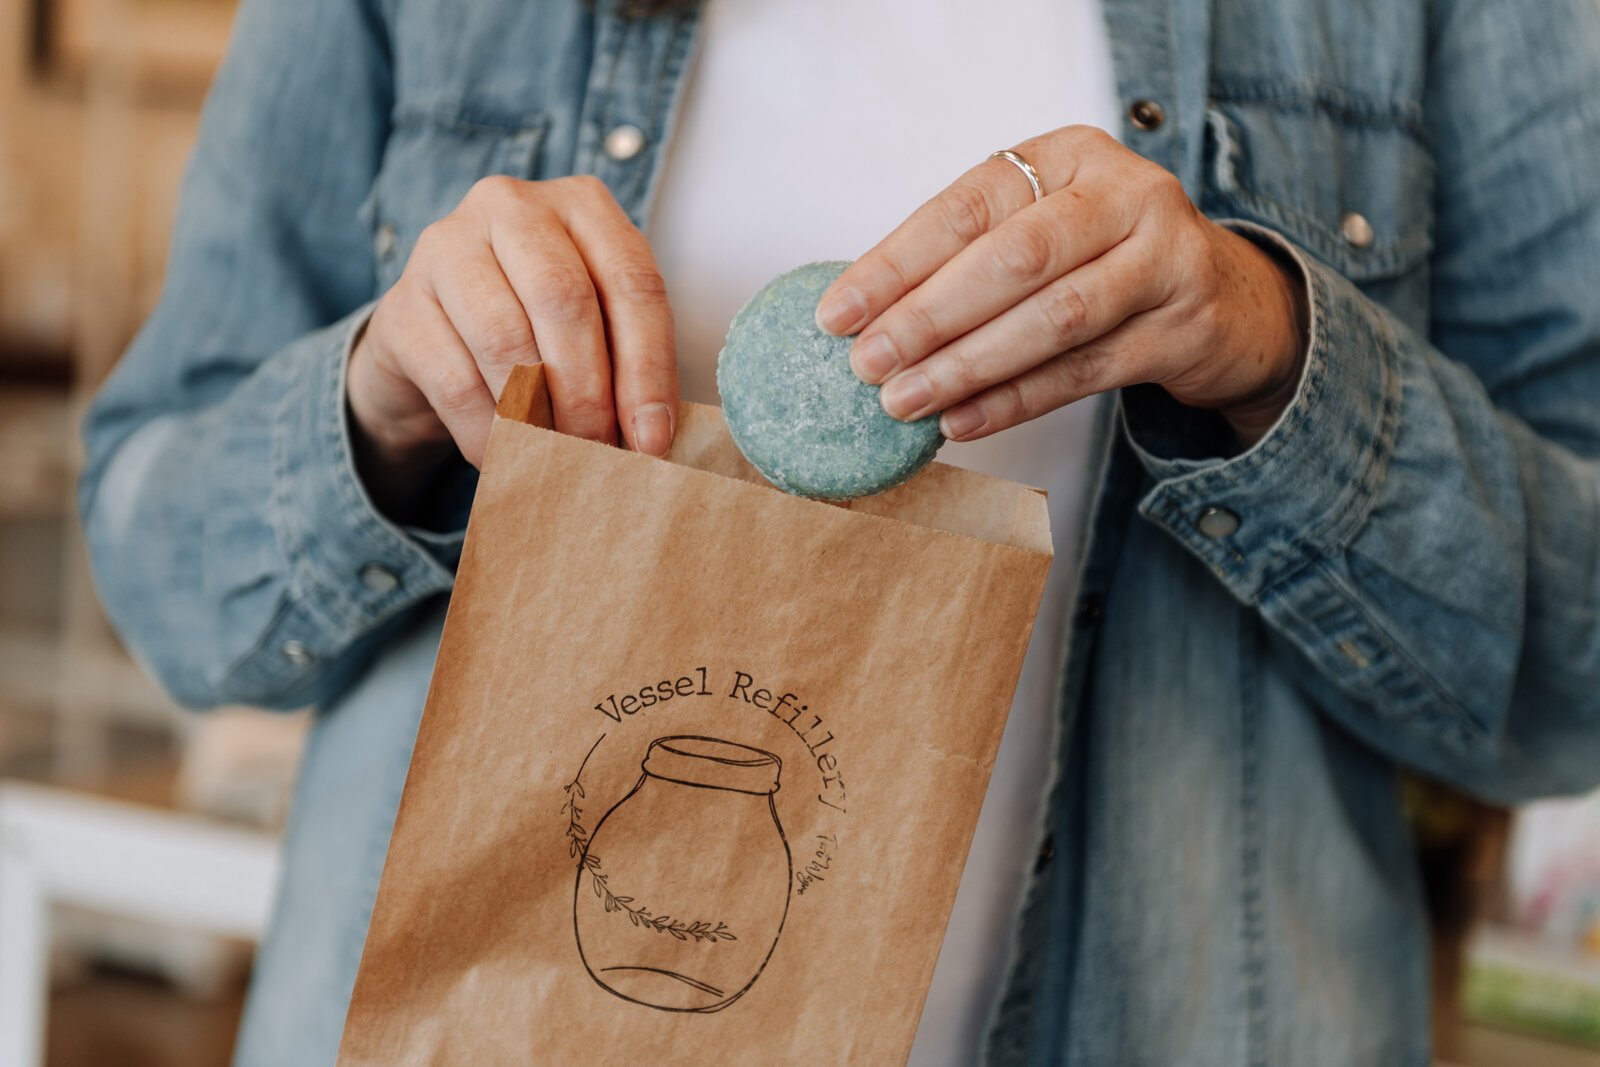 Heather Eracleous, owner of Vessel Refillery FW, puts a lemongrass, lime + rosemary shampoo bar in a bag.